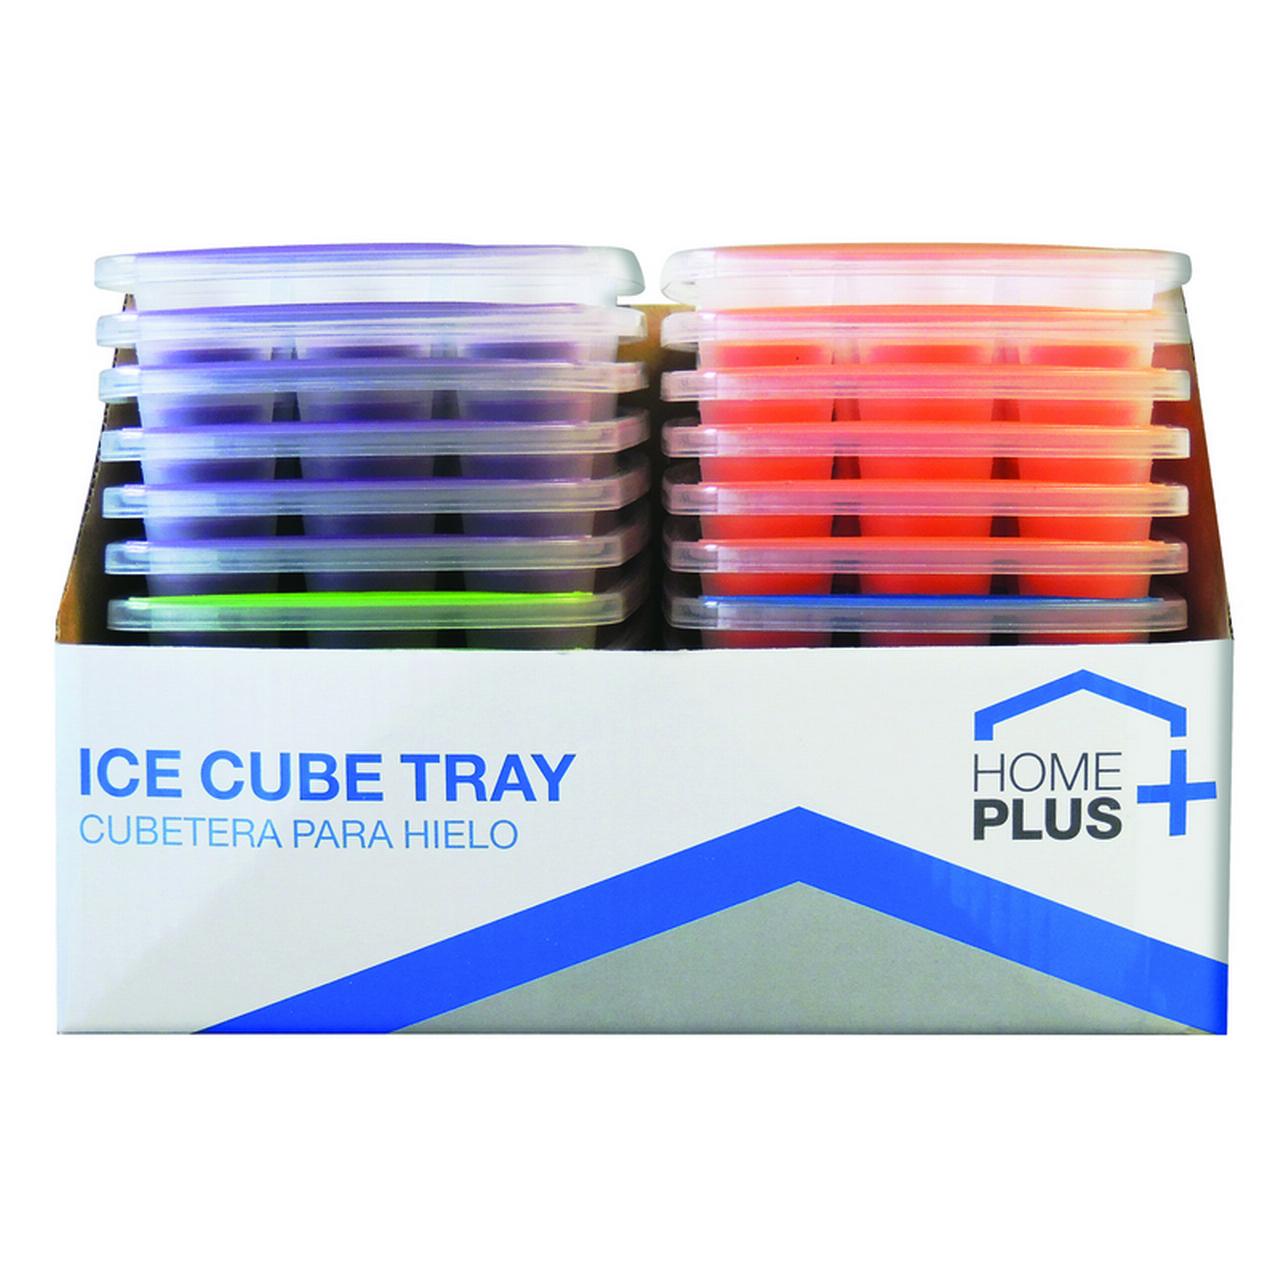 Home Plus Assorted Colors Plastic Ice Cube Trays - image 2 of 2